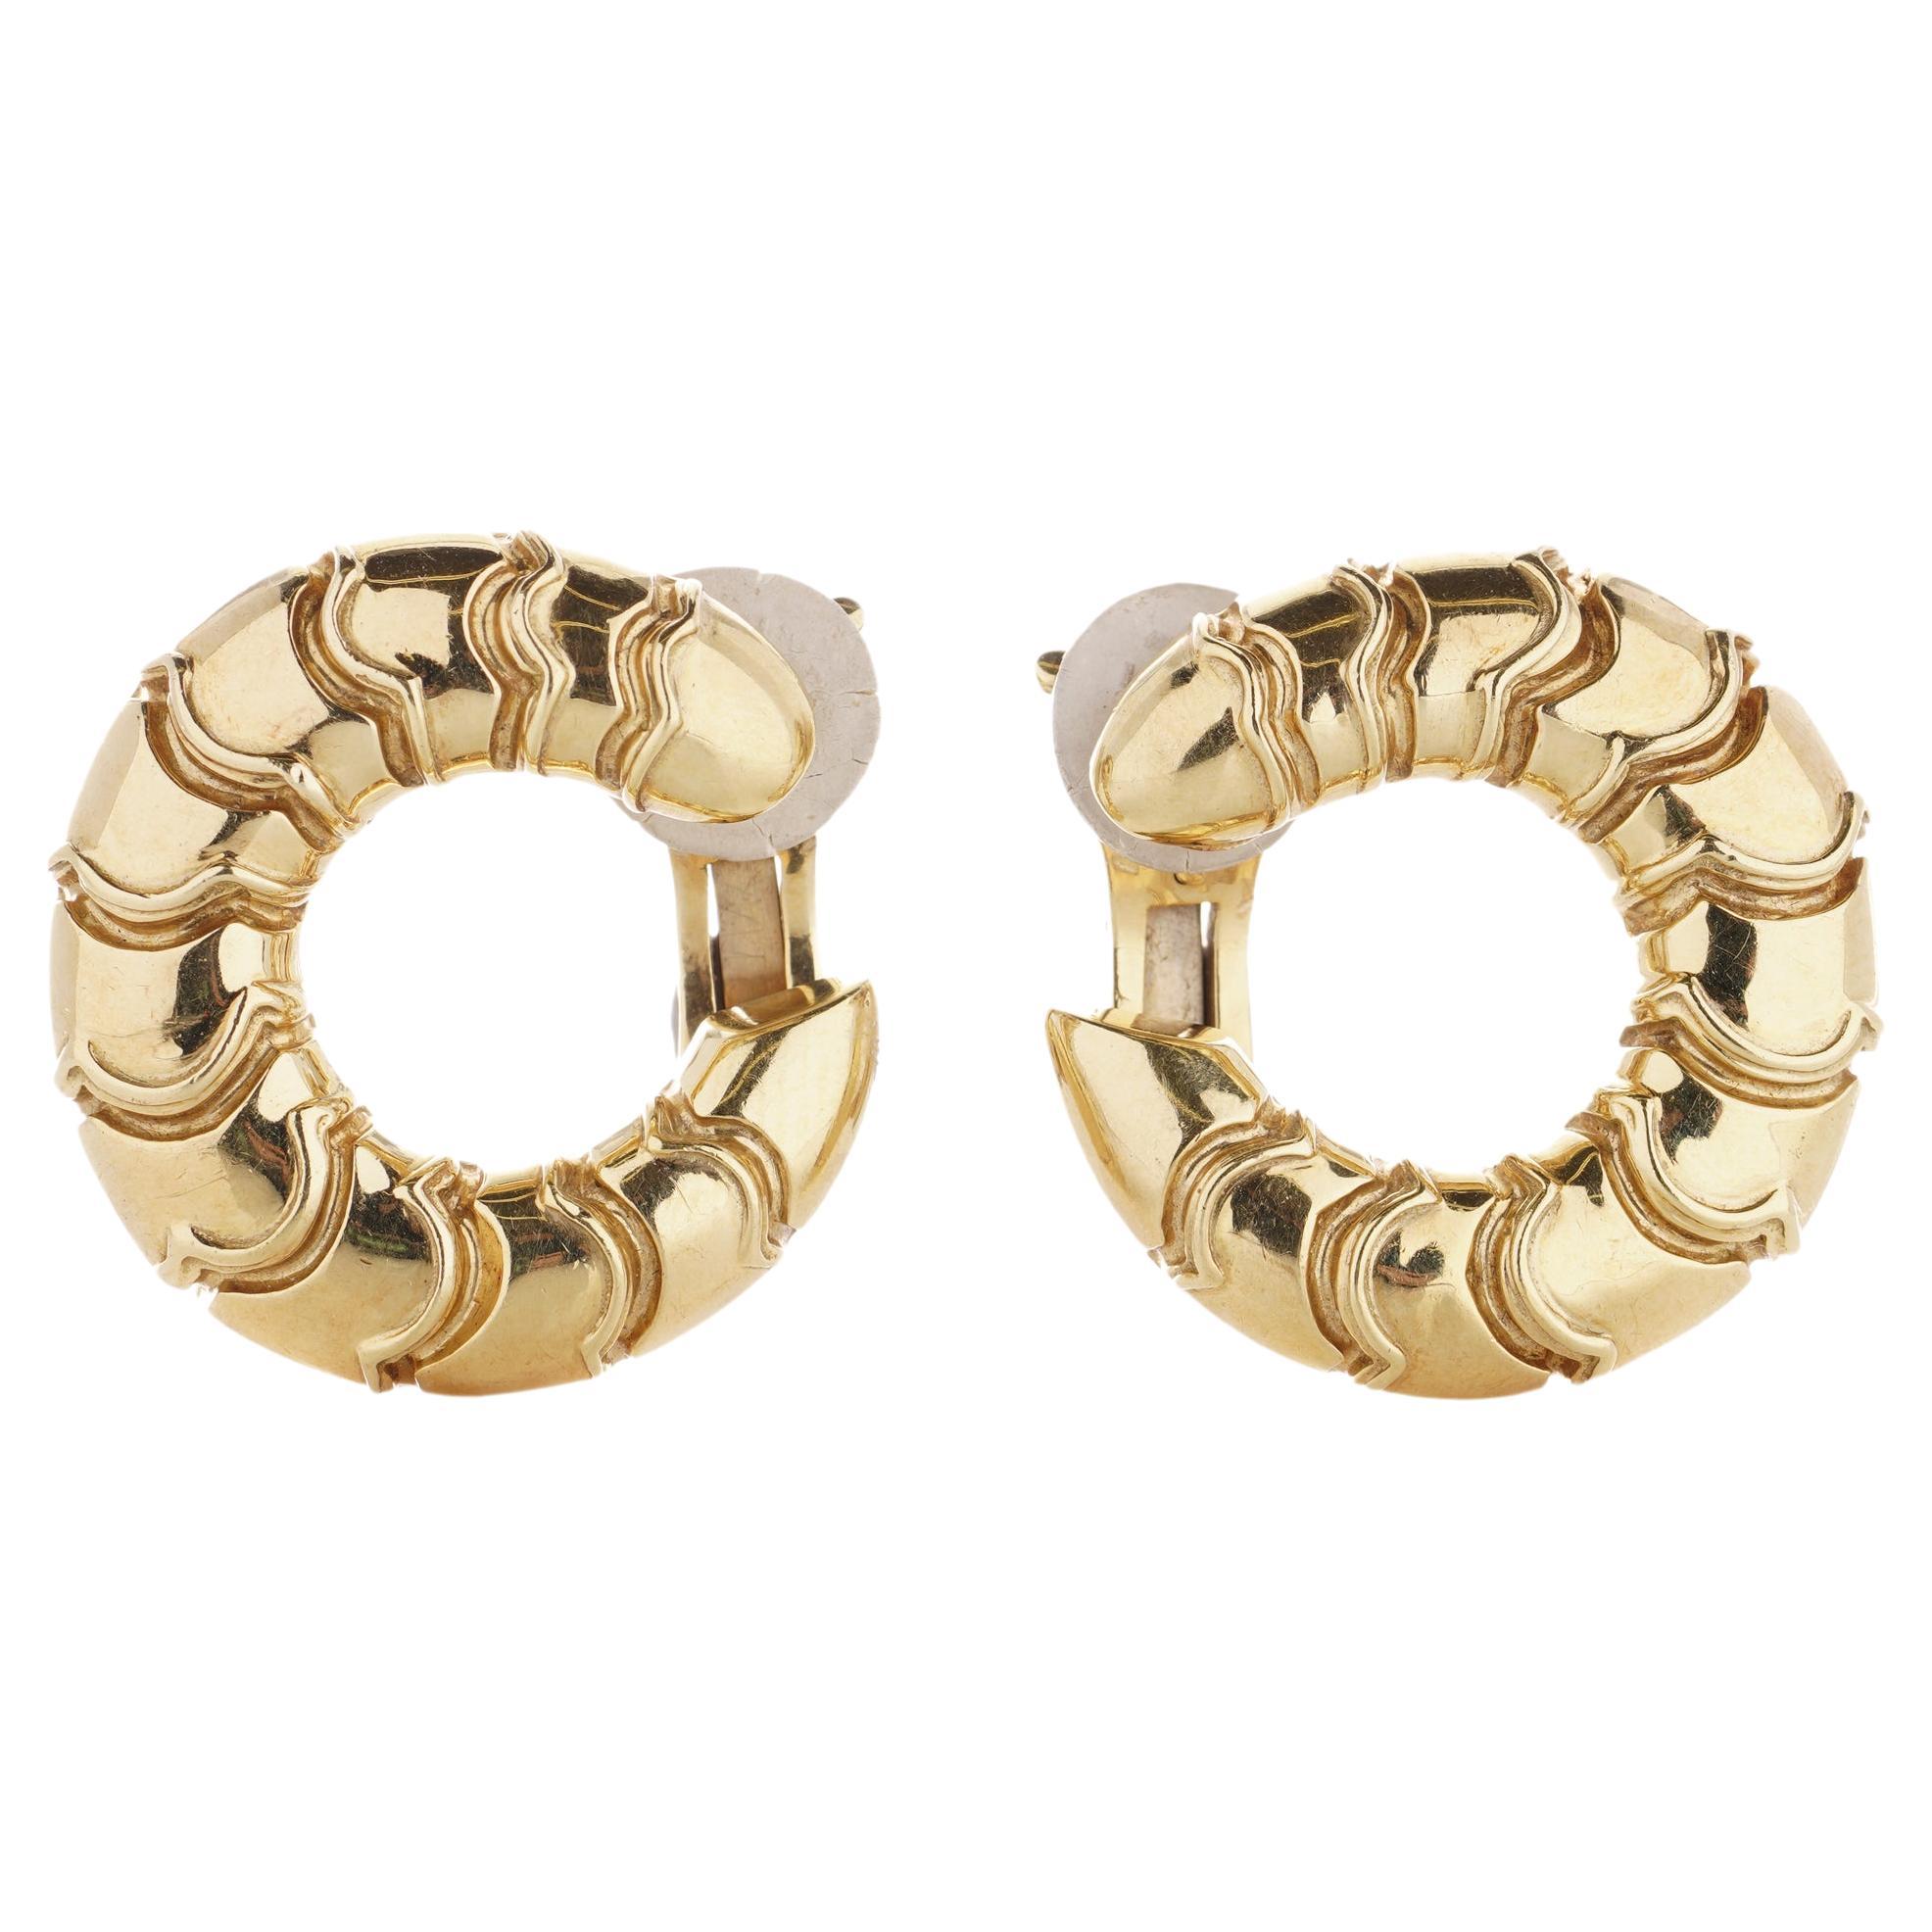 Marina B. Milan 18kt gold vintage pair of hoop ear clips in a scallop design